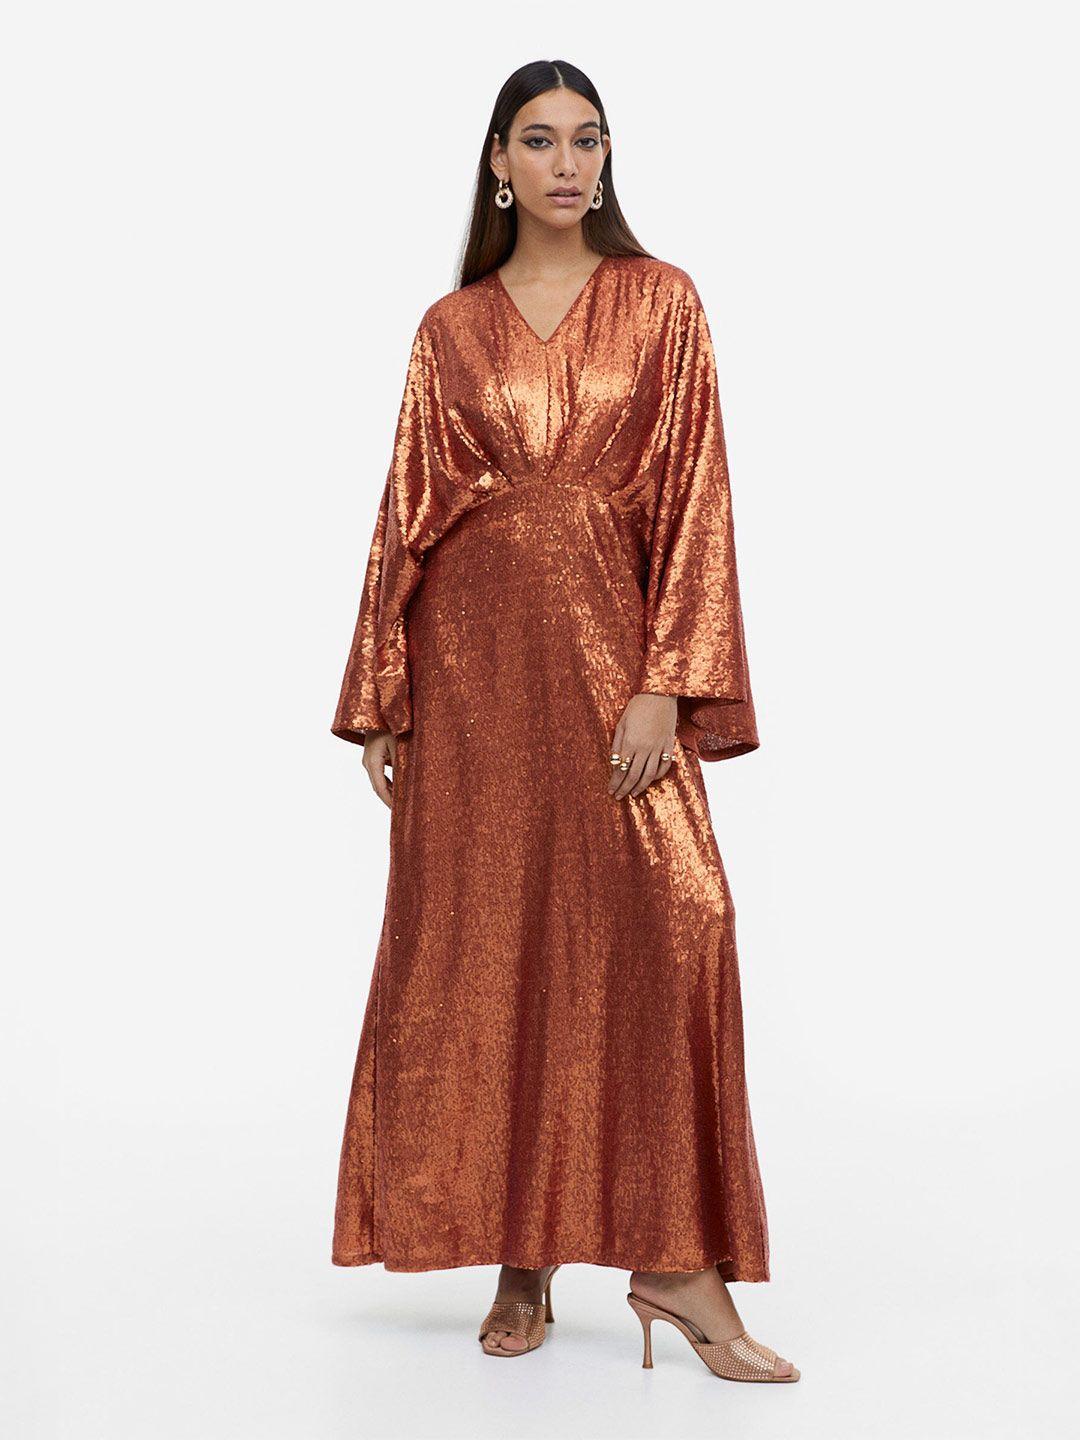 h&m-woman-sequined-dress